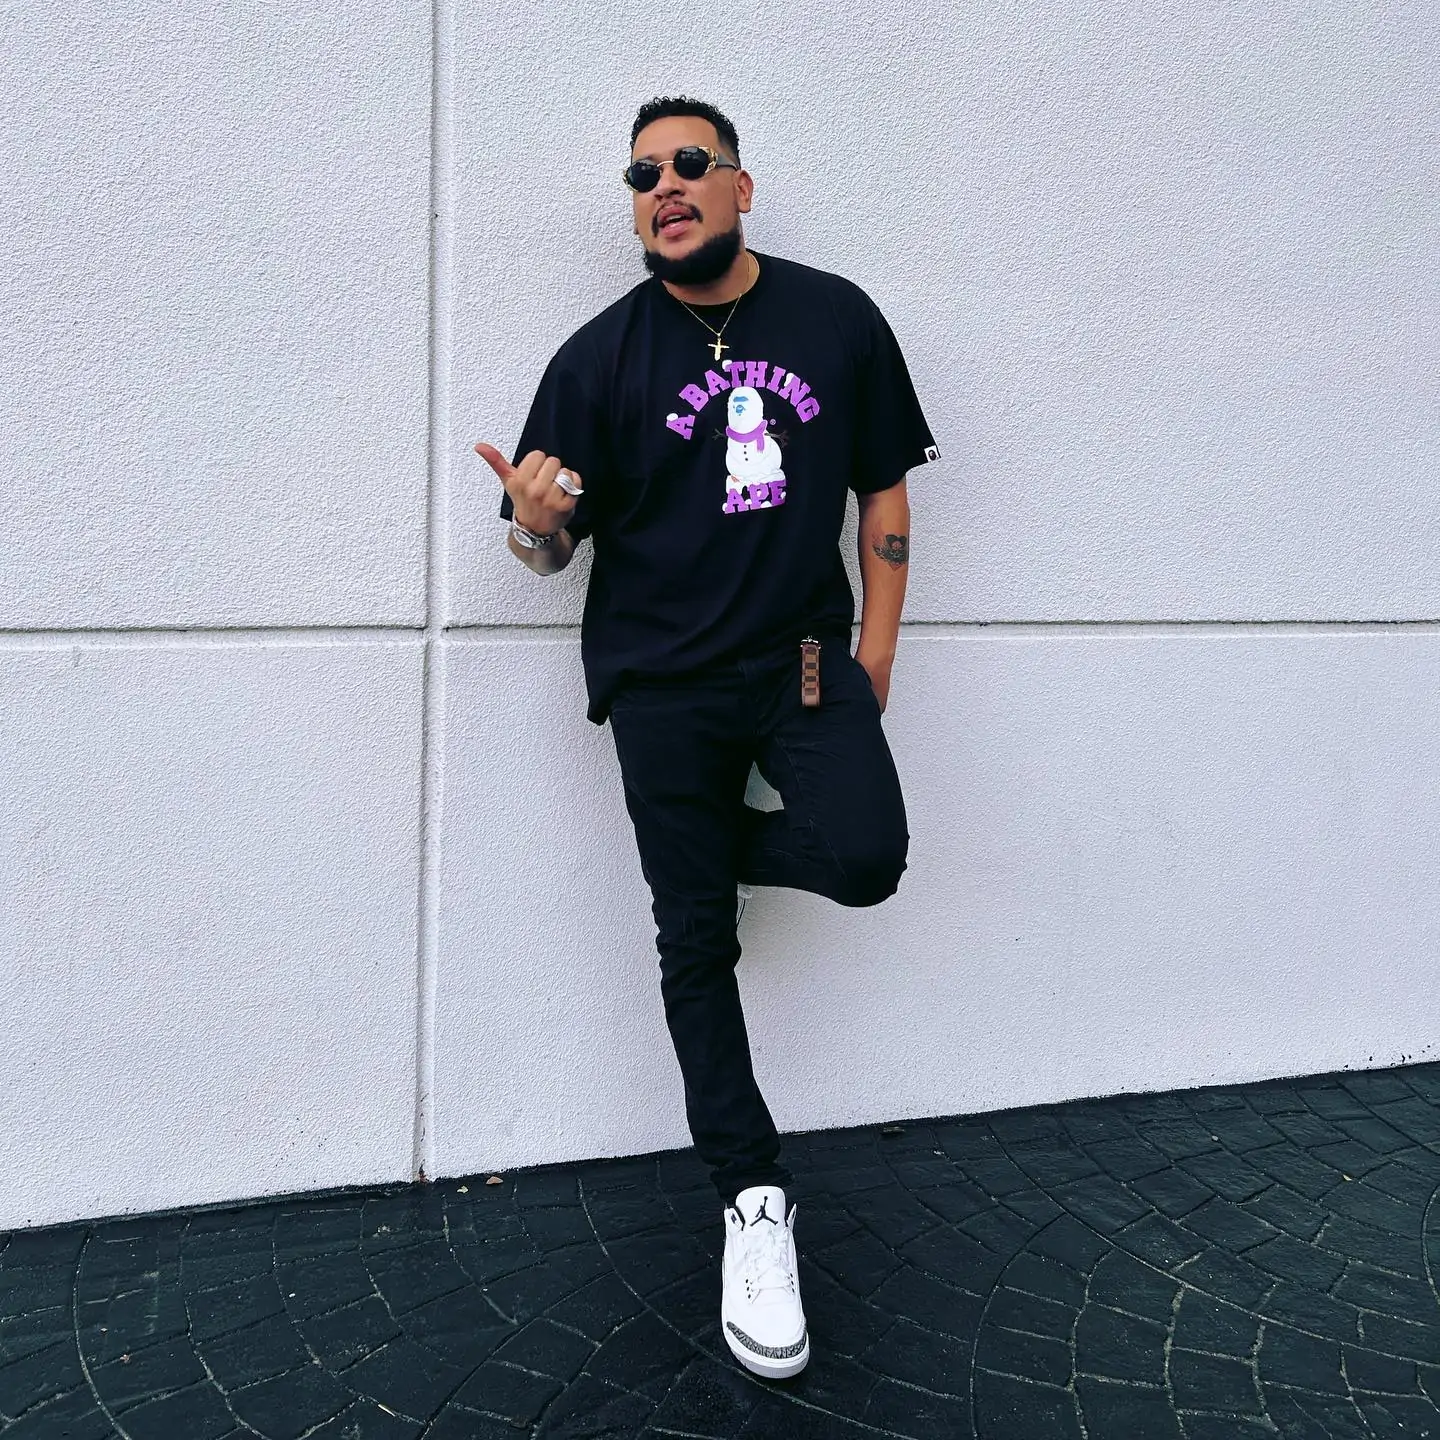 AKA’s funeral and memorial service details revealed